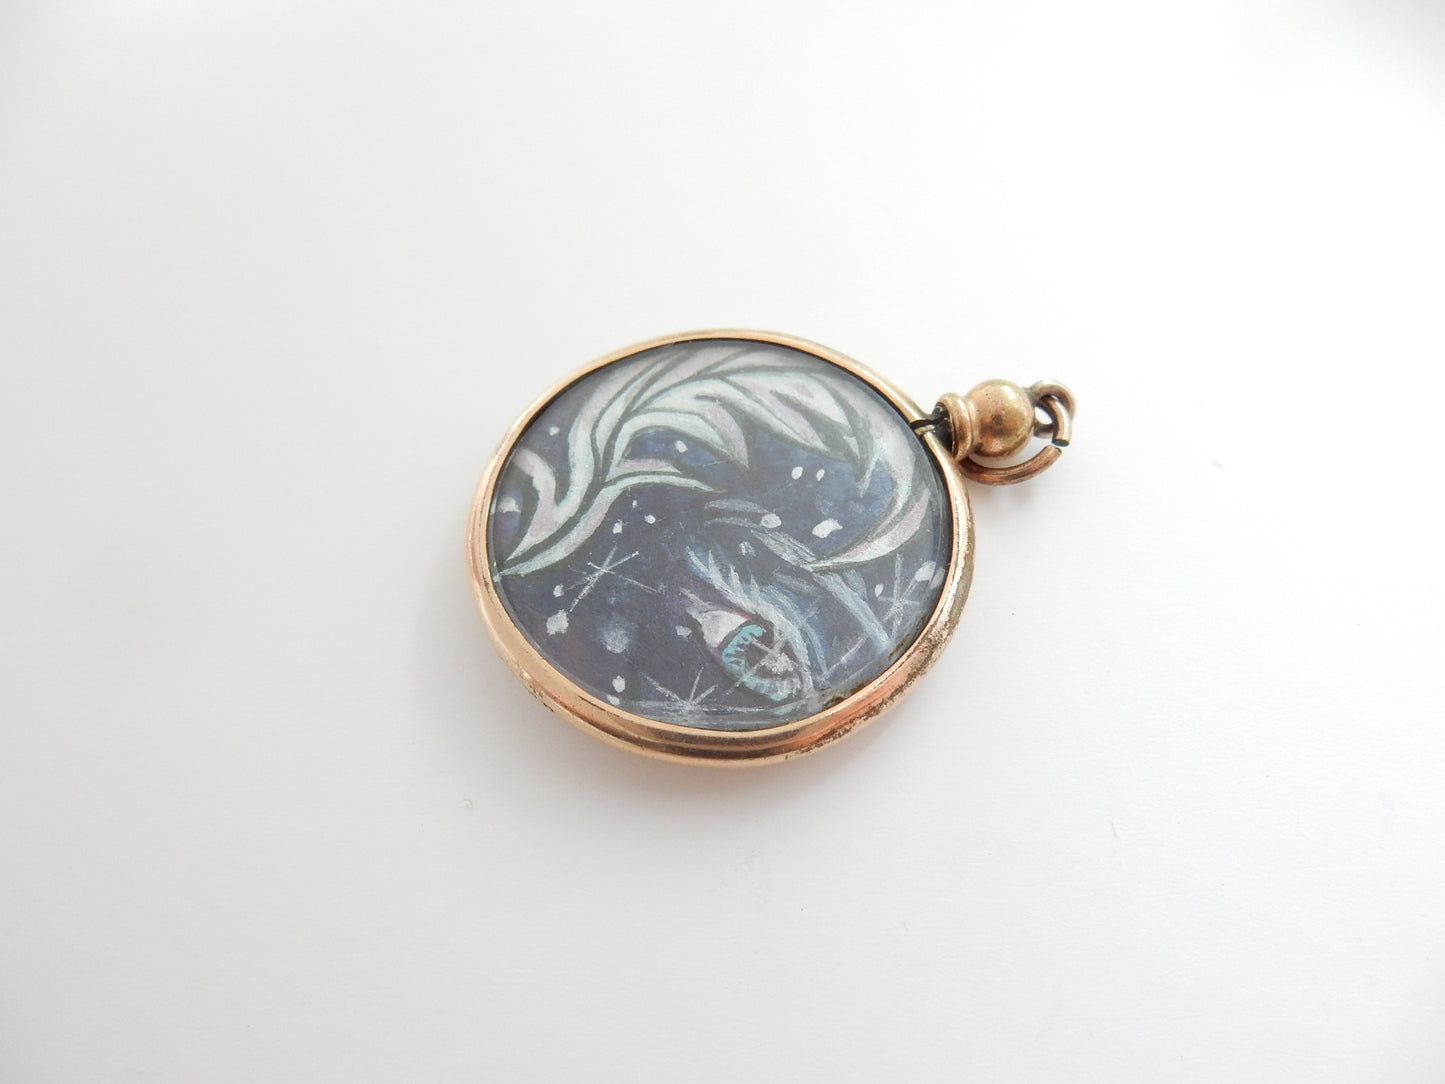 "Snow Queen" Antique Locket depicting Painted Portrait of a Night Sky with an Eye